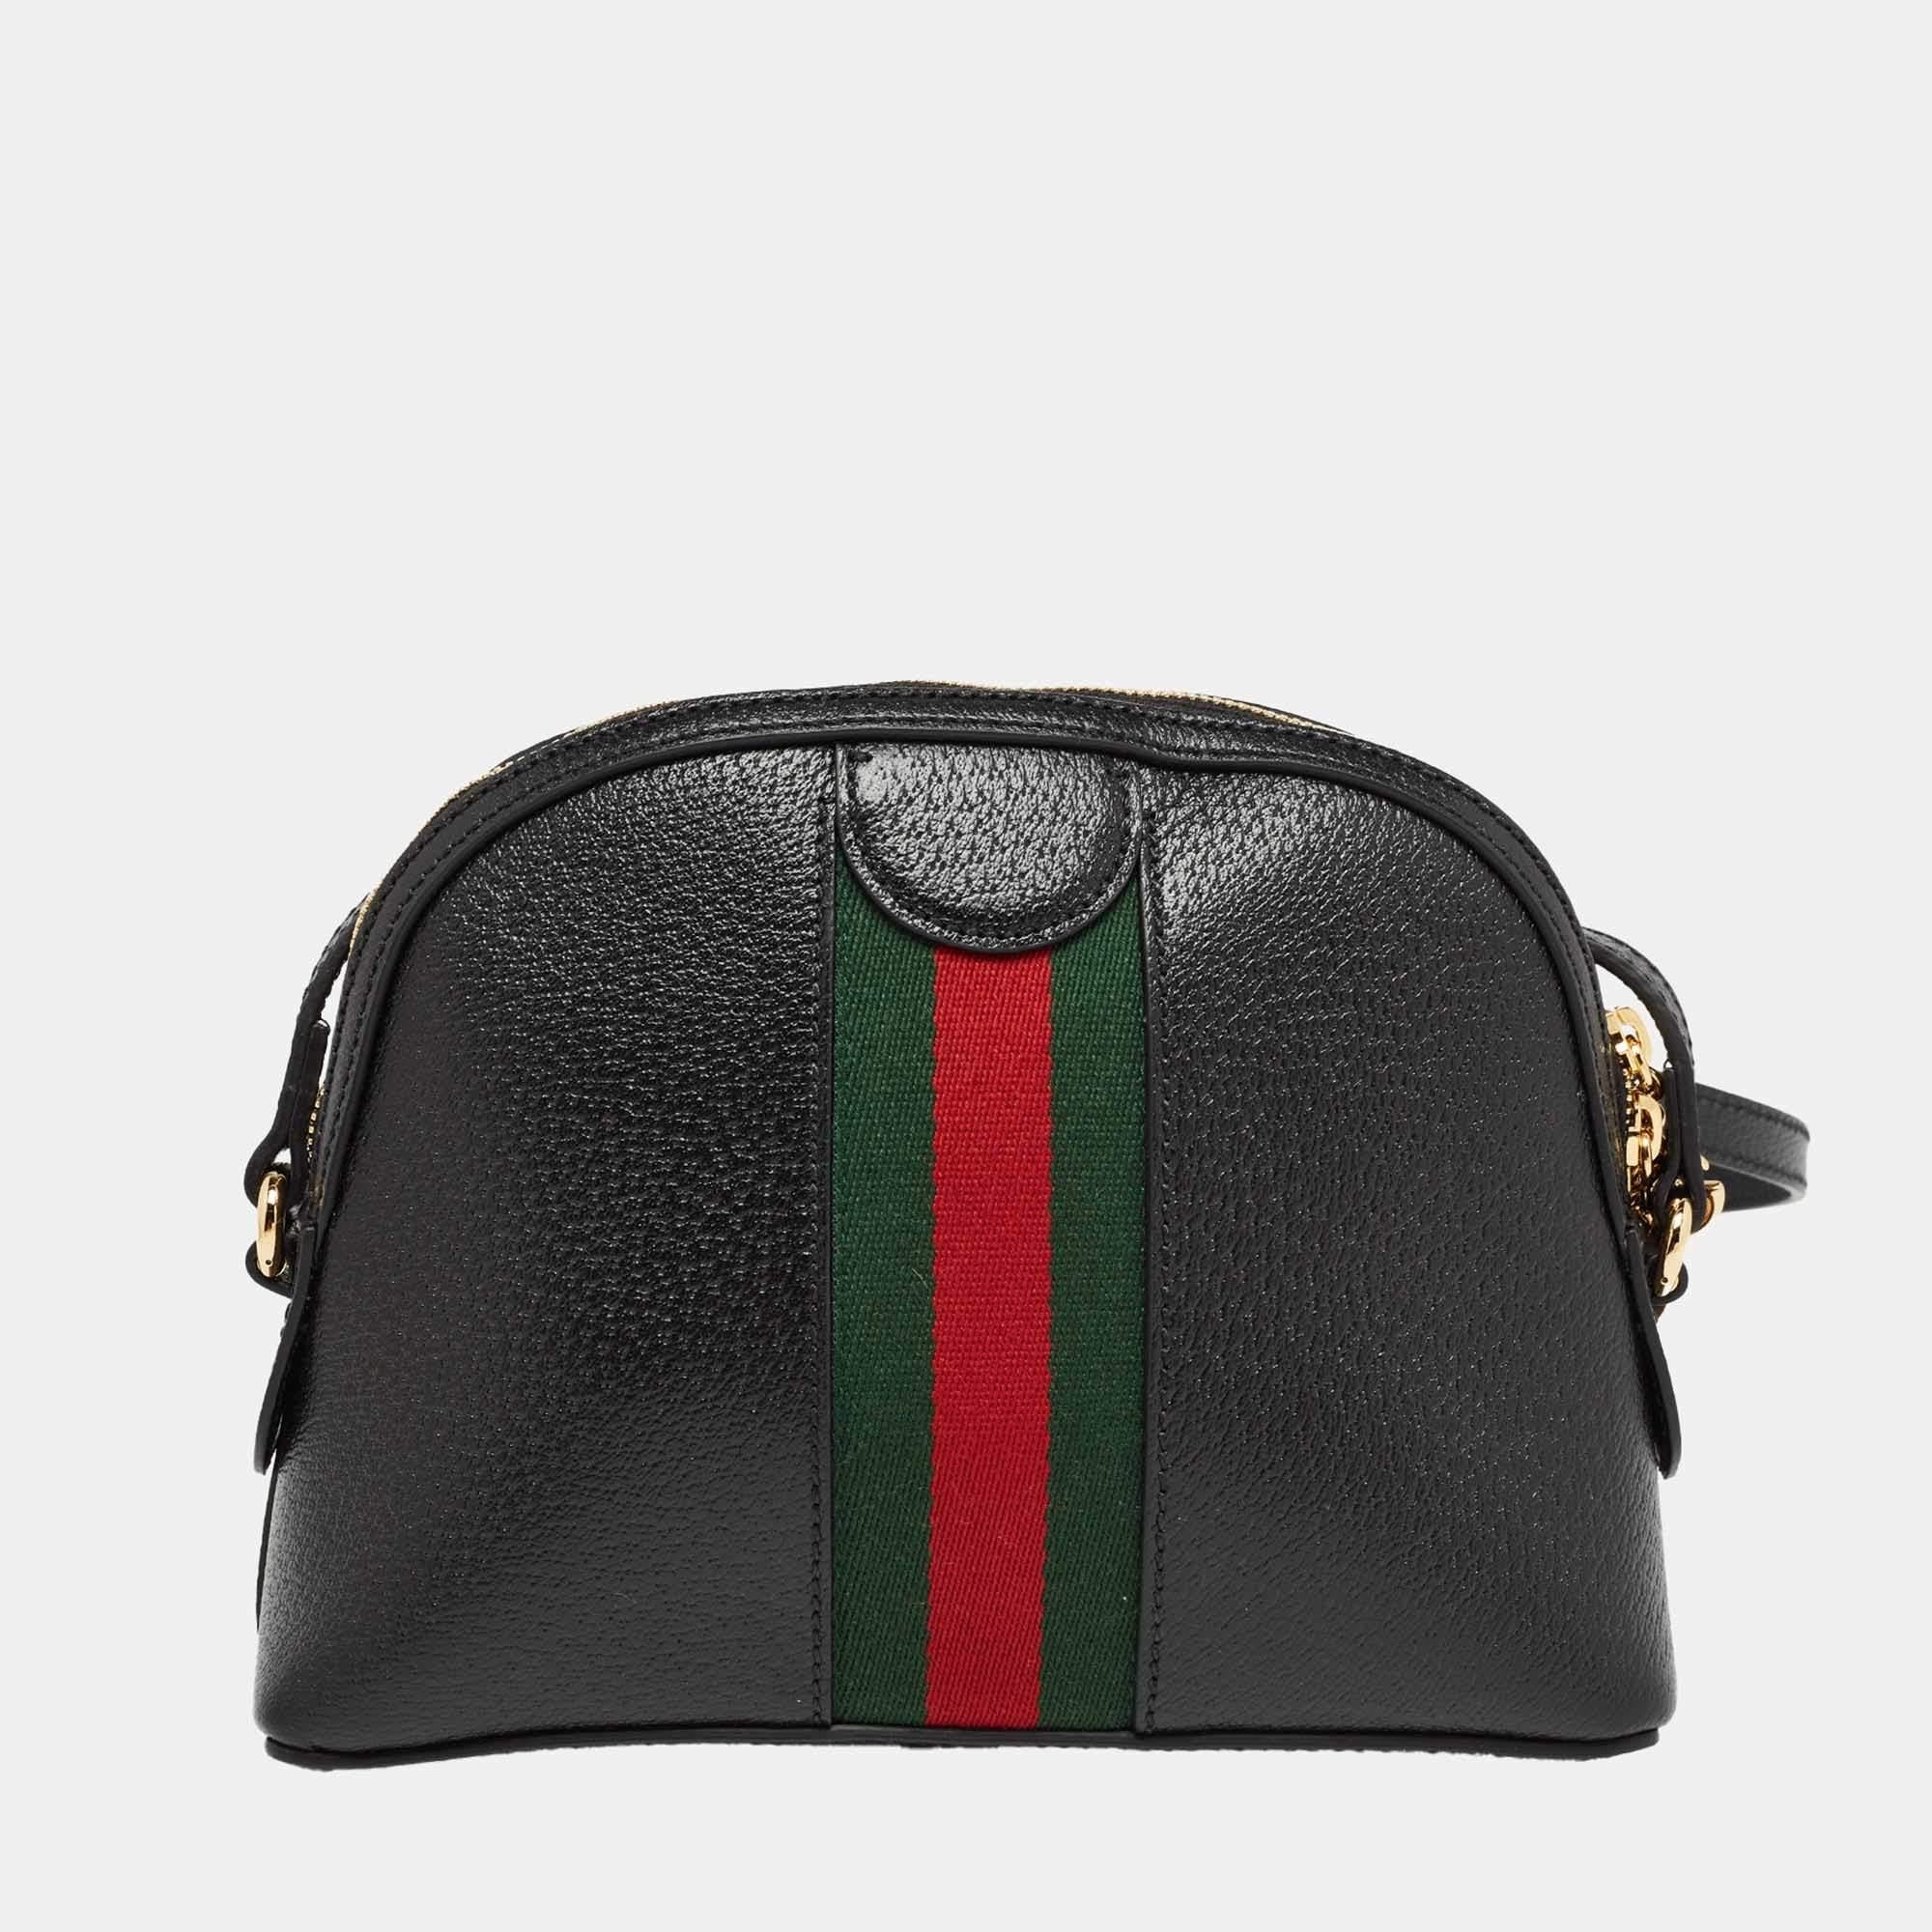 Every creation from Gucci is noteworthy for its timeless charm and versatile design. Created from leather, this Gucci Ophidia bag is imbued with heritage details. The Web stripe detailing and the interlocked 'GG' motif on the front give it a luxe